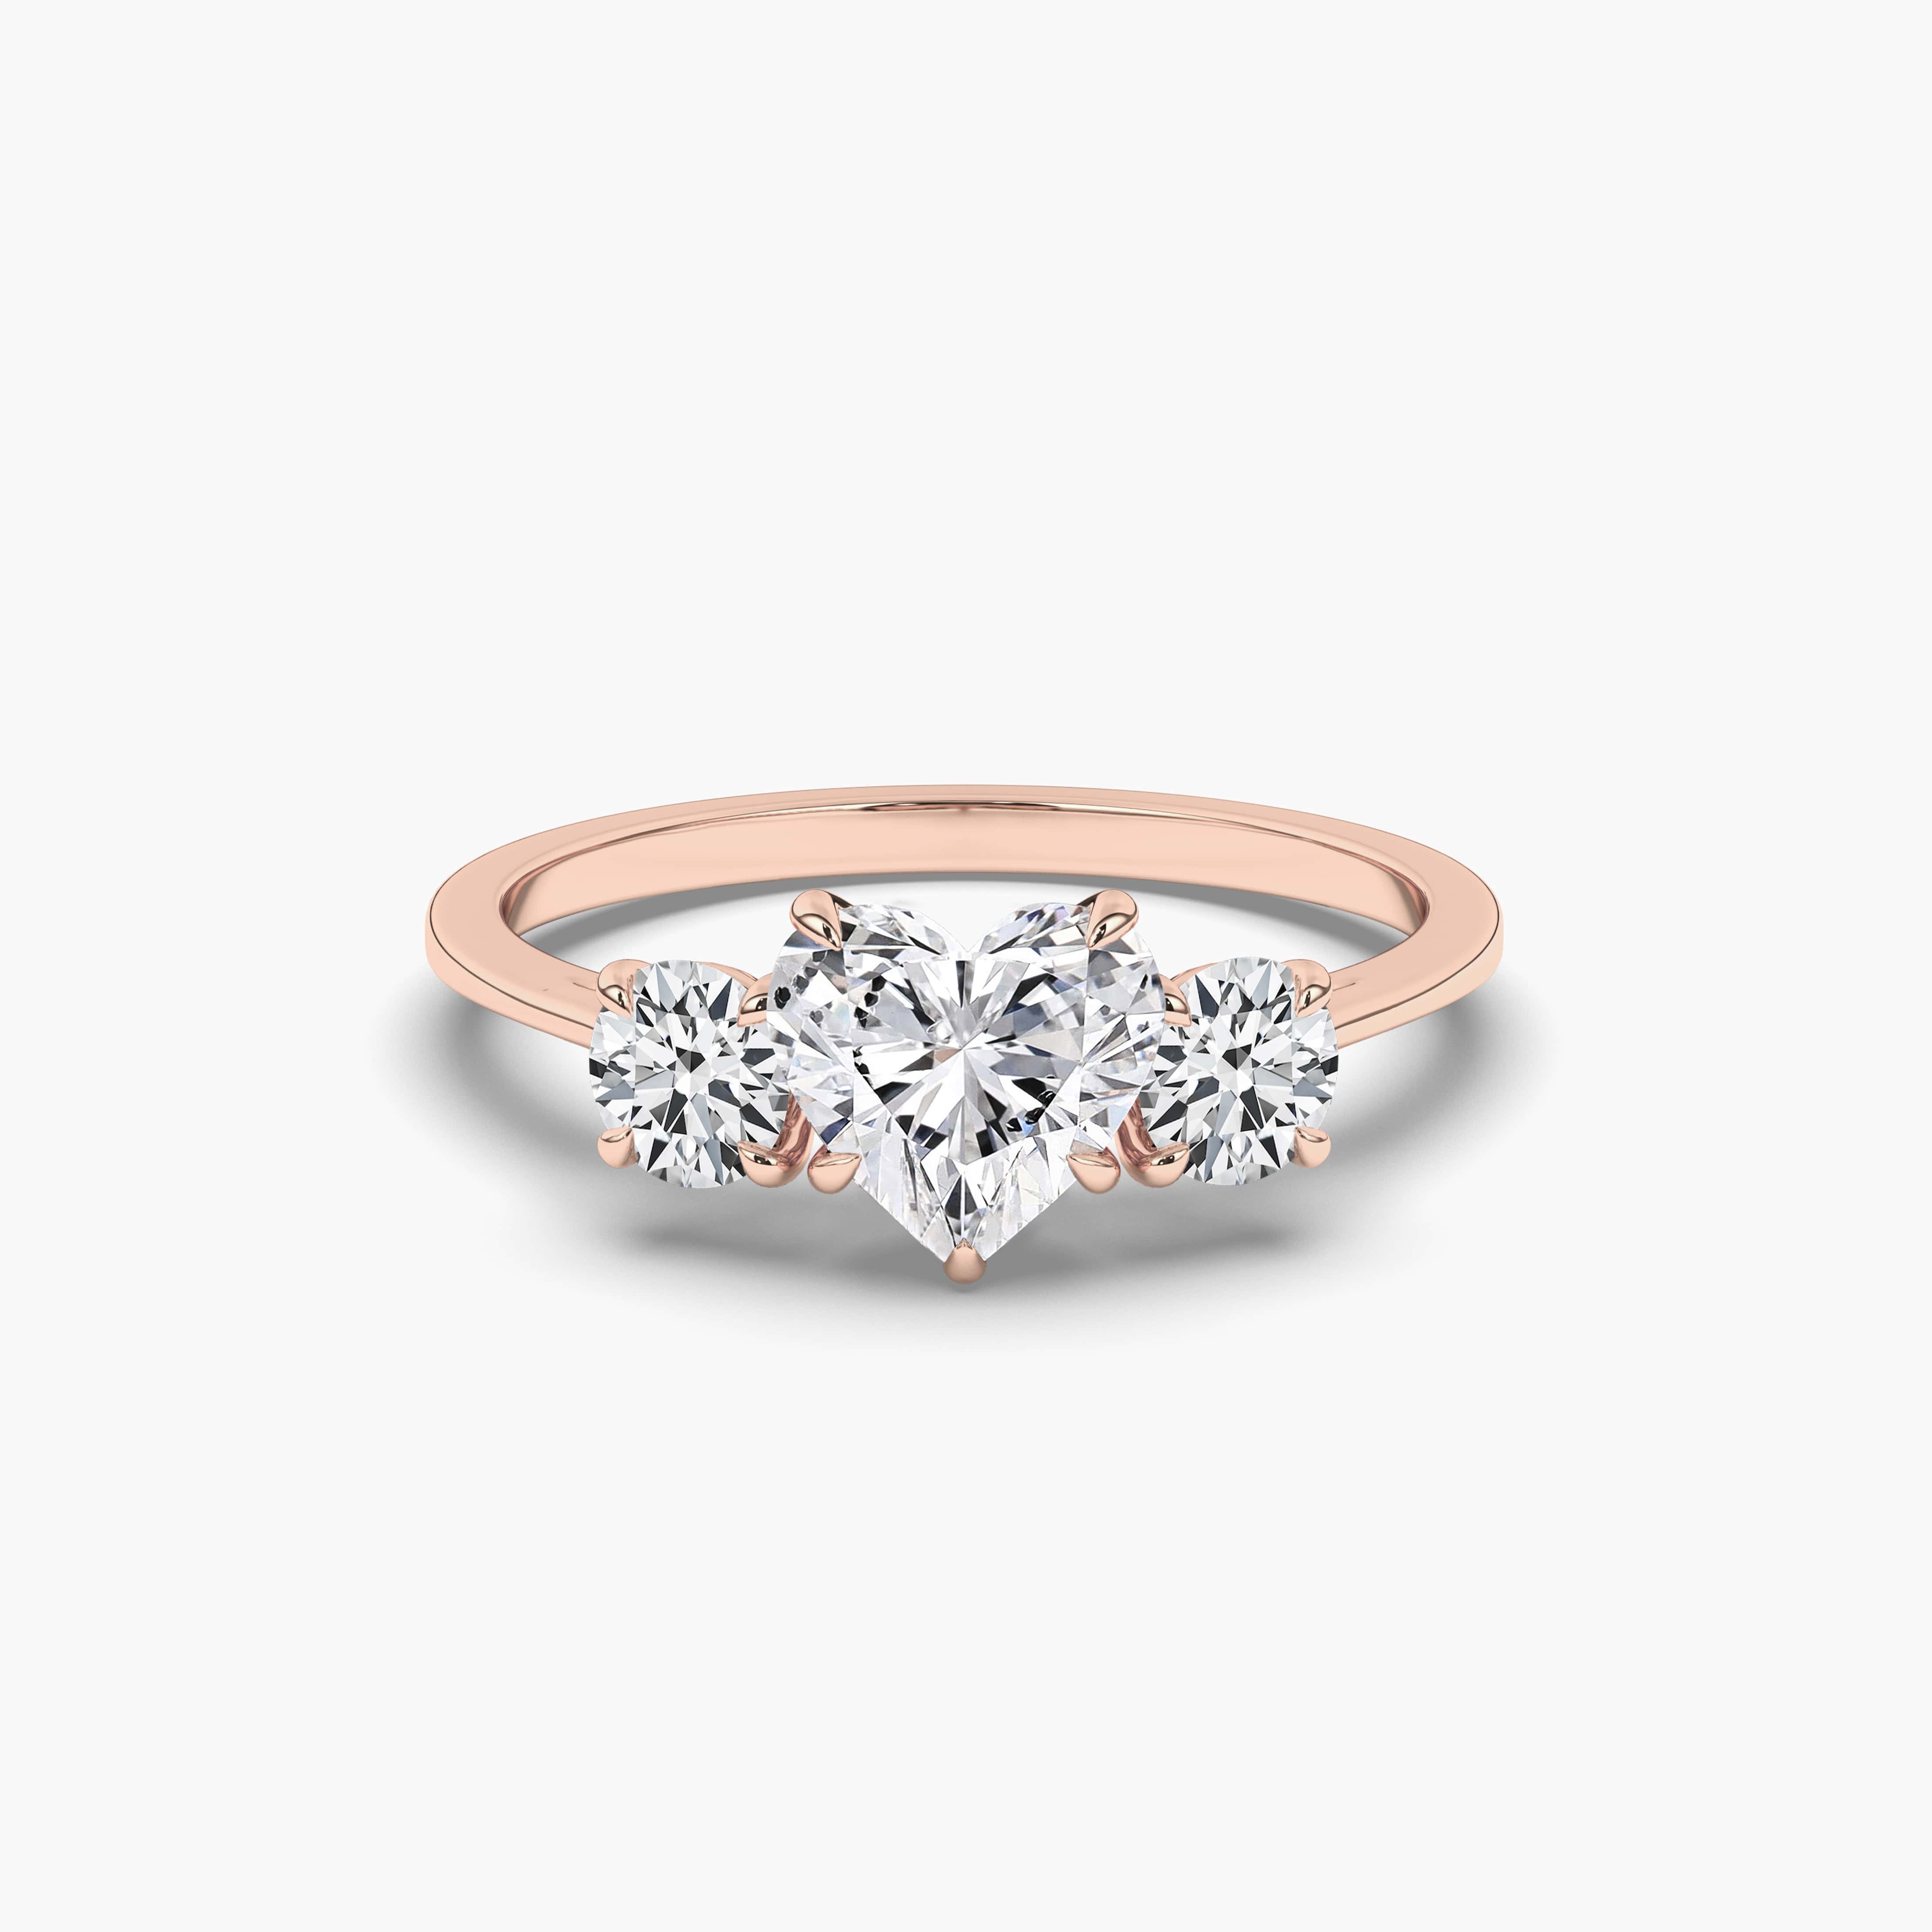  rose gold ring with heart cut solitaire